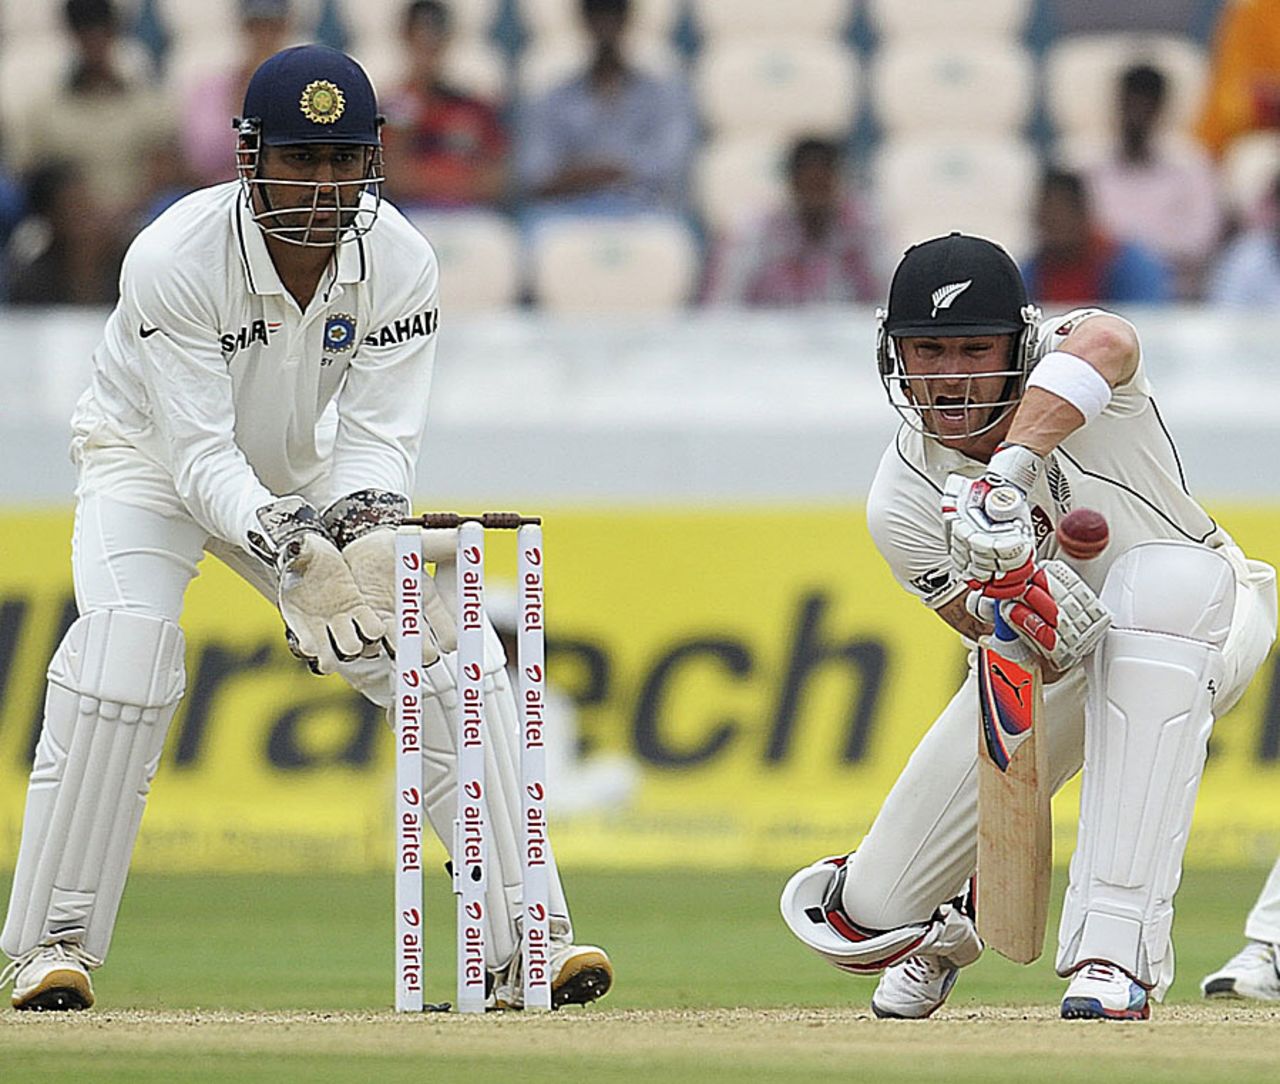 Brendon McCullum is solid in defense, India v New Zealand, 1st Test, Hyderabad, 4th day, August 26, 2012